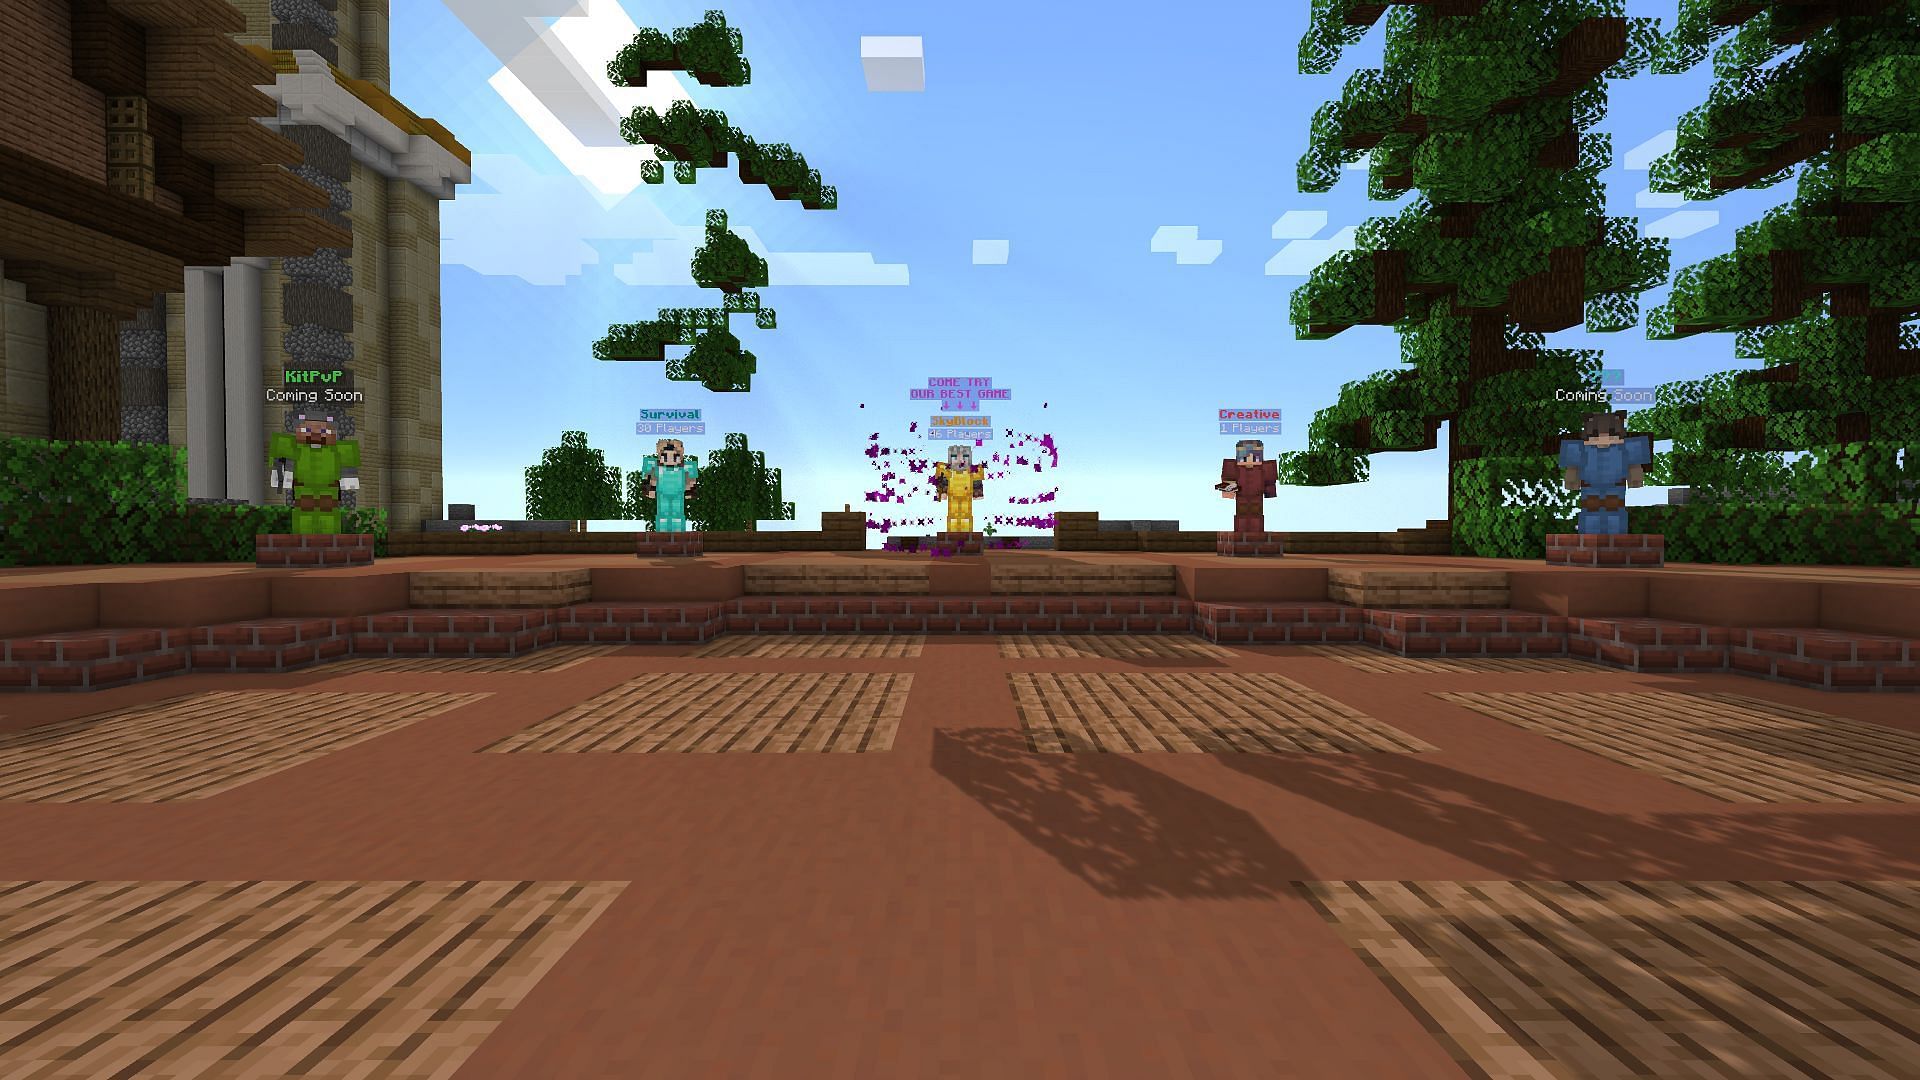 The spawn area of the PlayFuse server (Image via Minecraft)